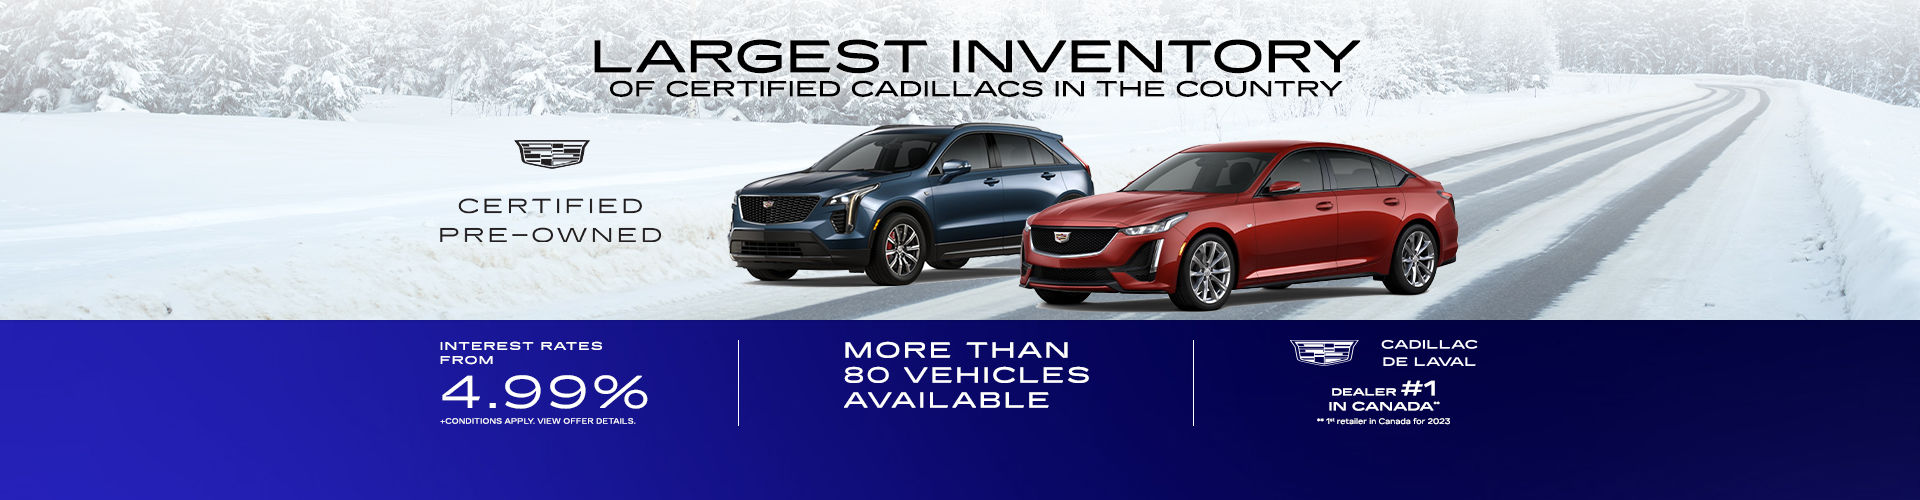 Largest inventory of certified Cadillacs in the country